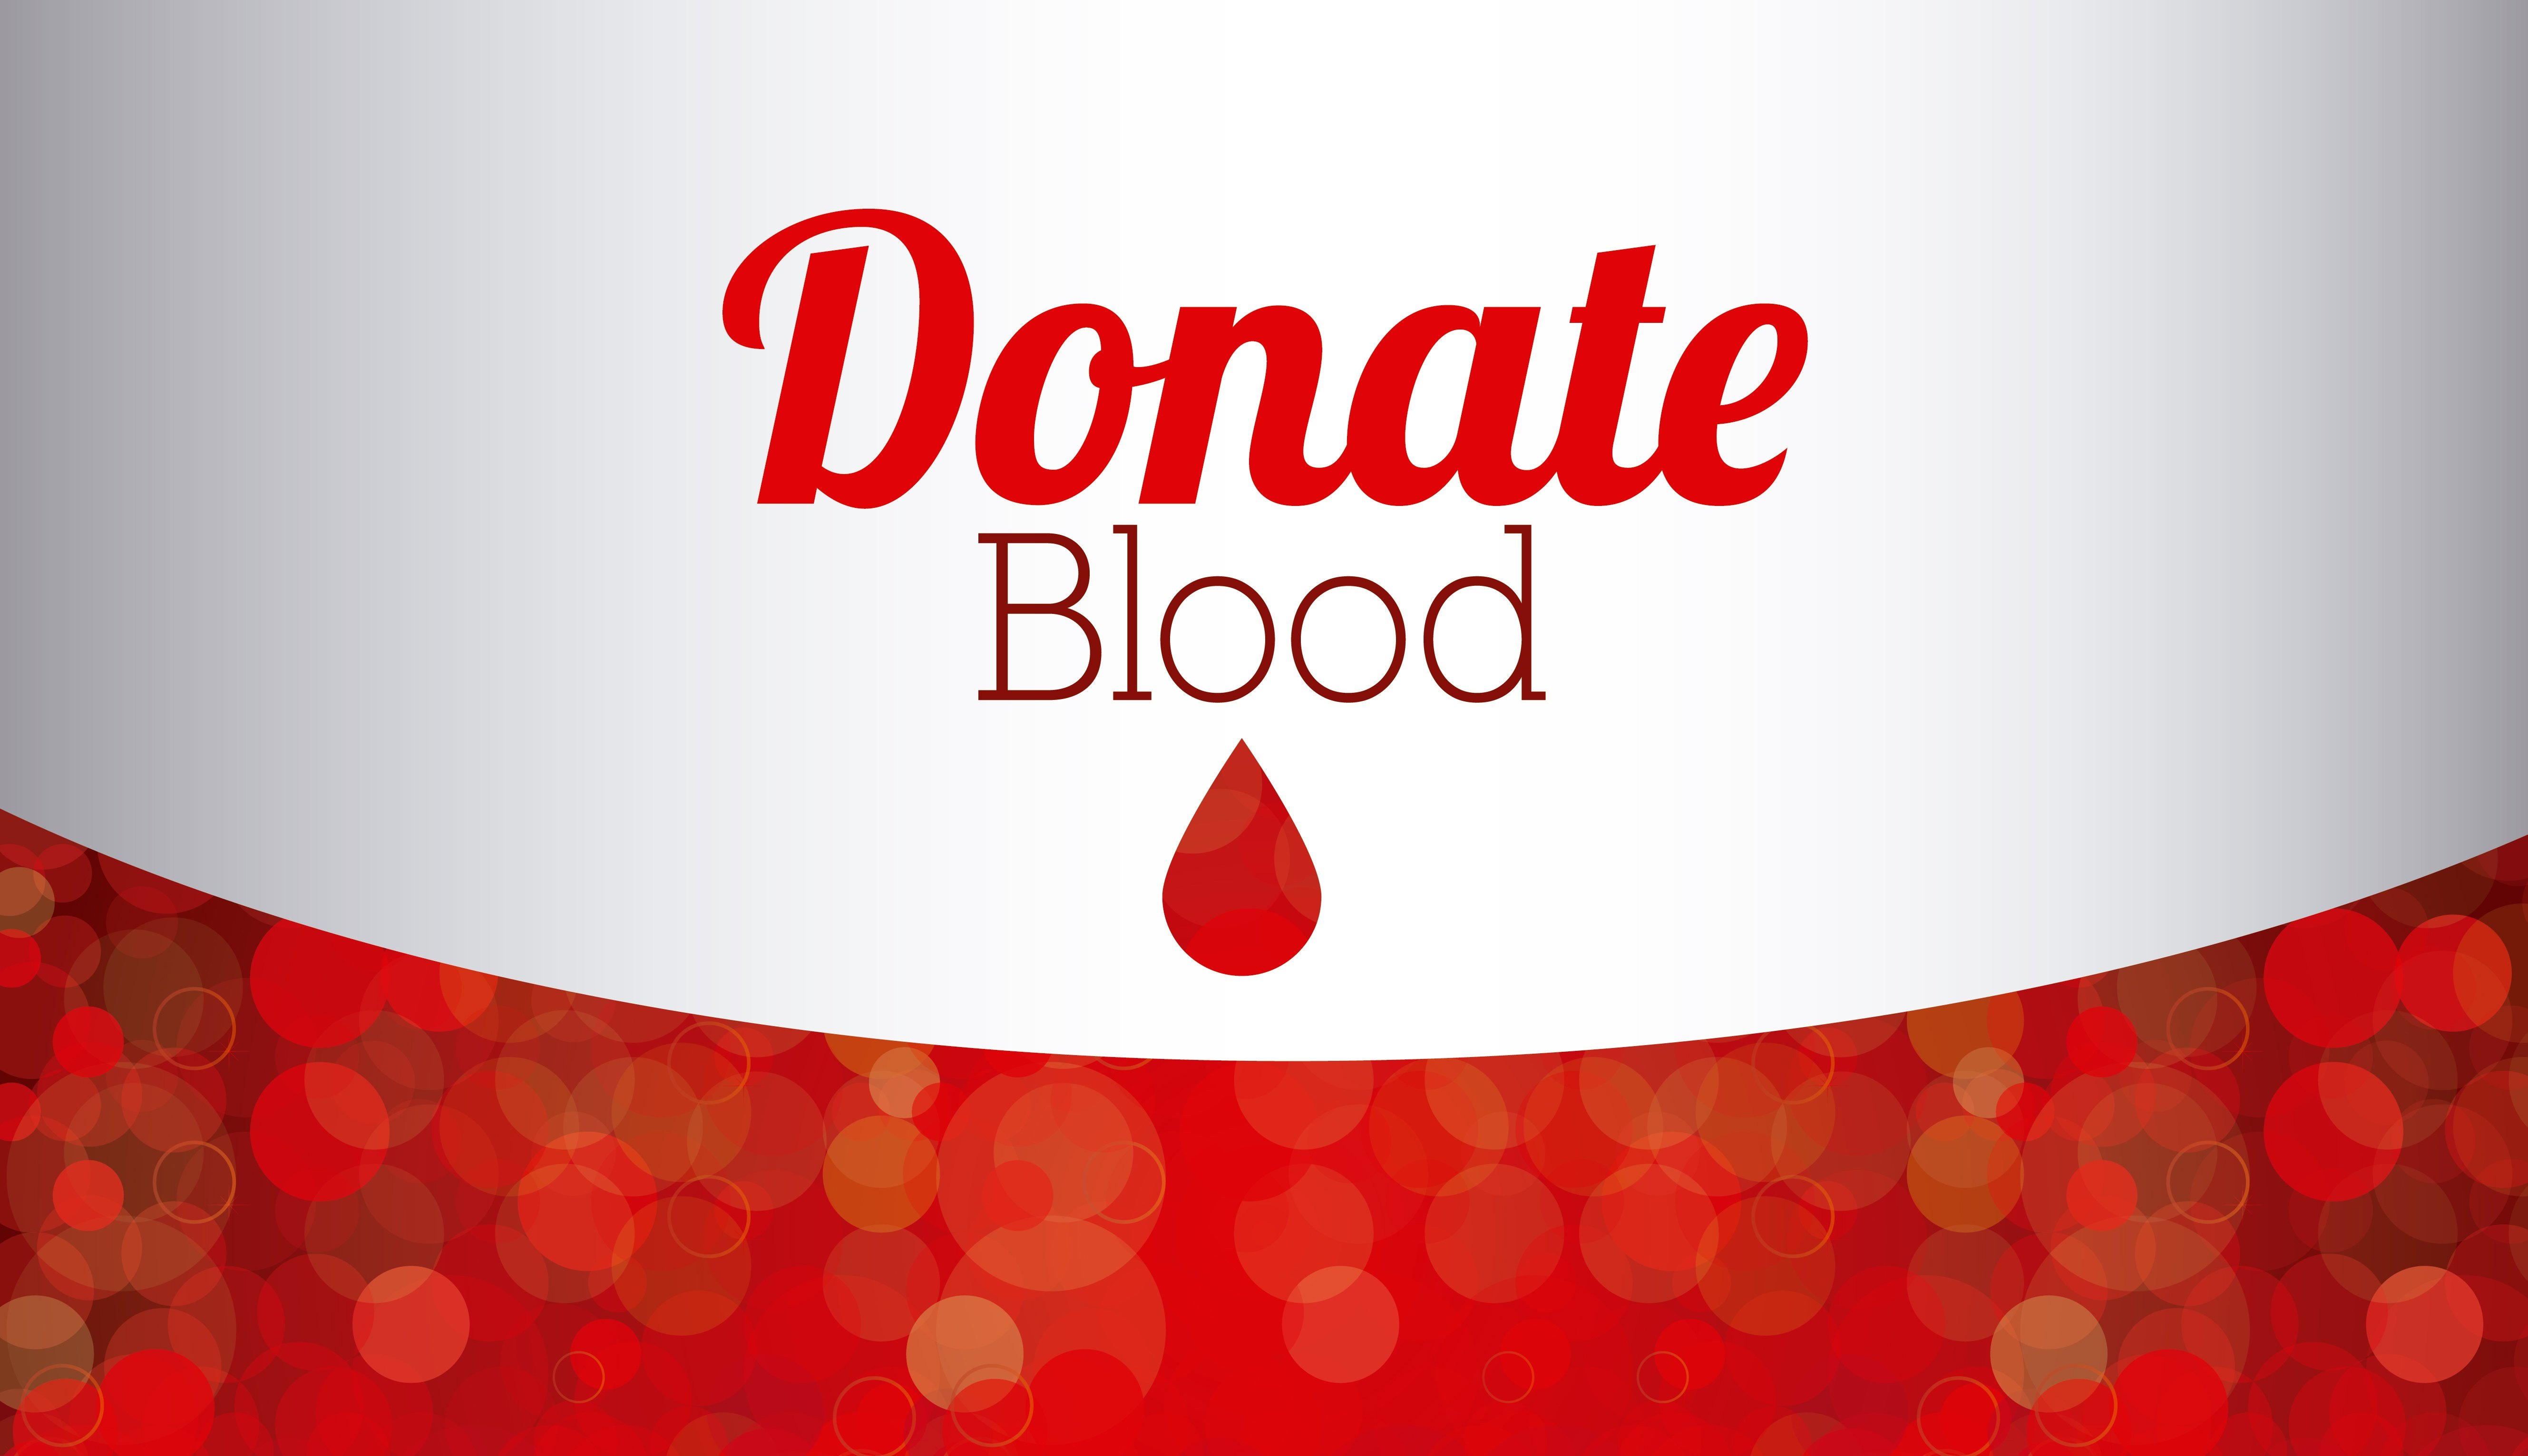 How Does Giving Blood Affect Your Iron Levels?